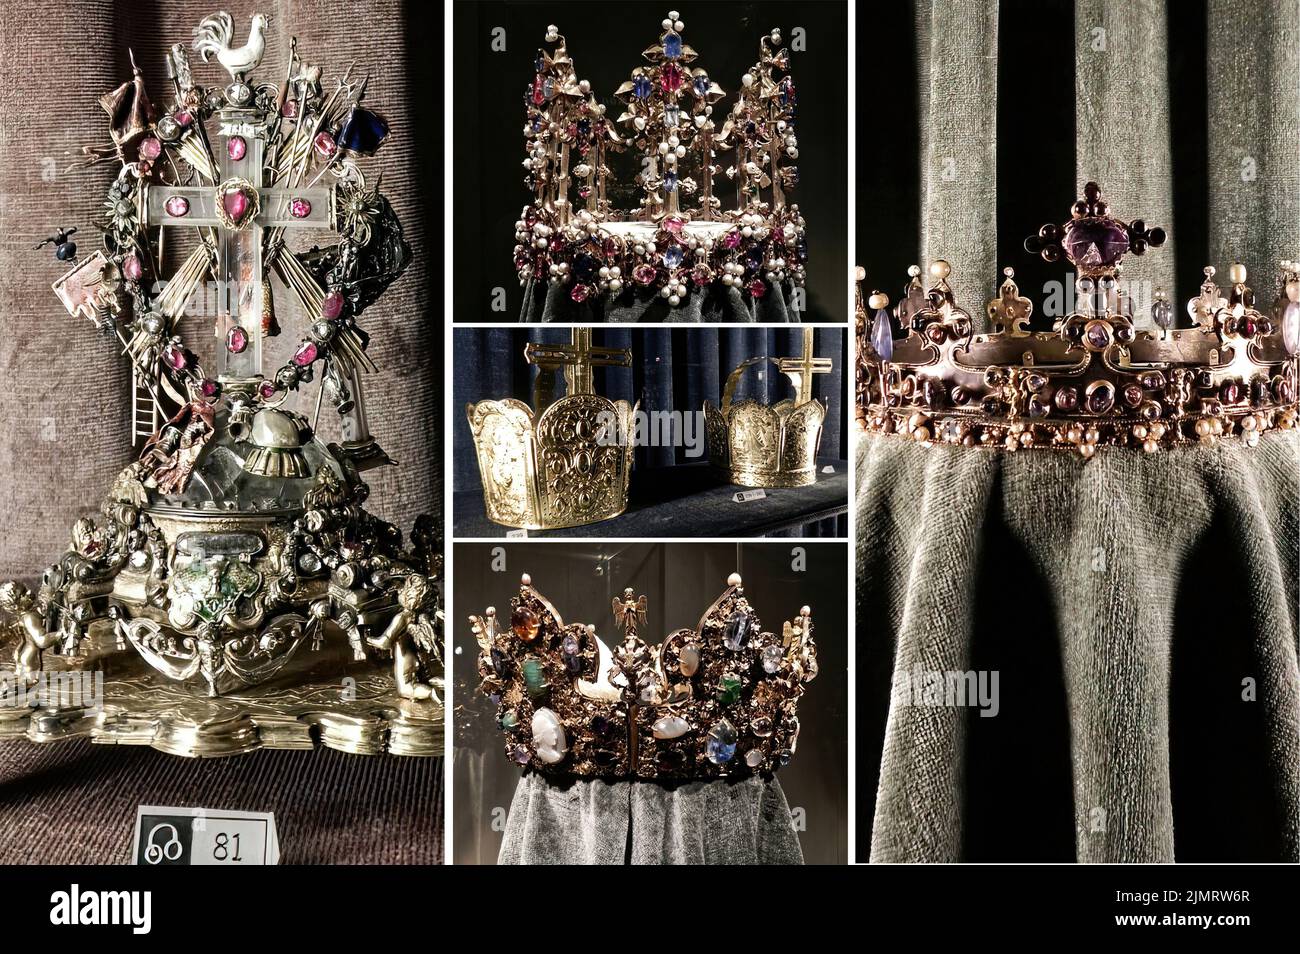 The Treasures of the Bavarian Kings in the residence of the Bavarian Kingdom in Munich. Stock Photo